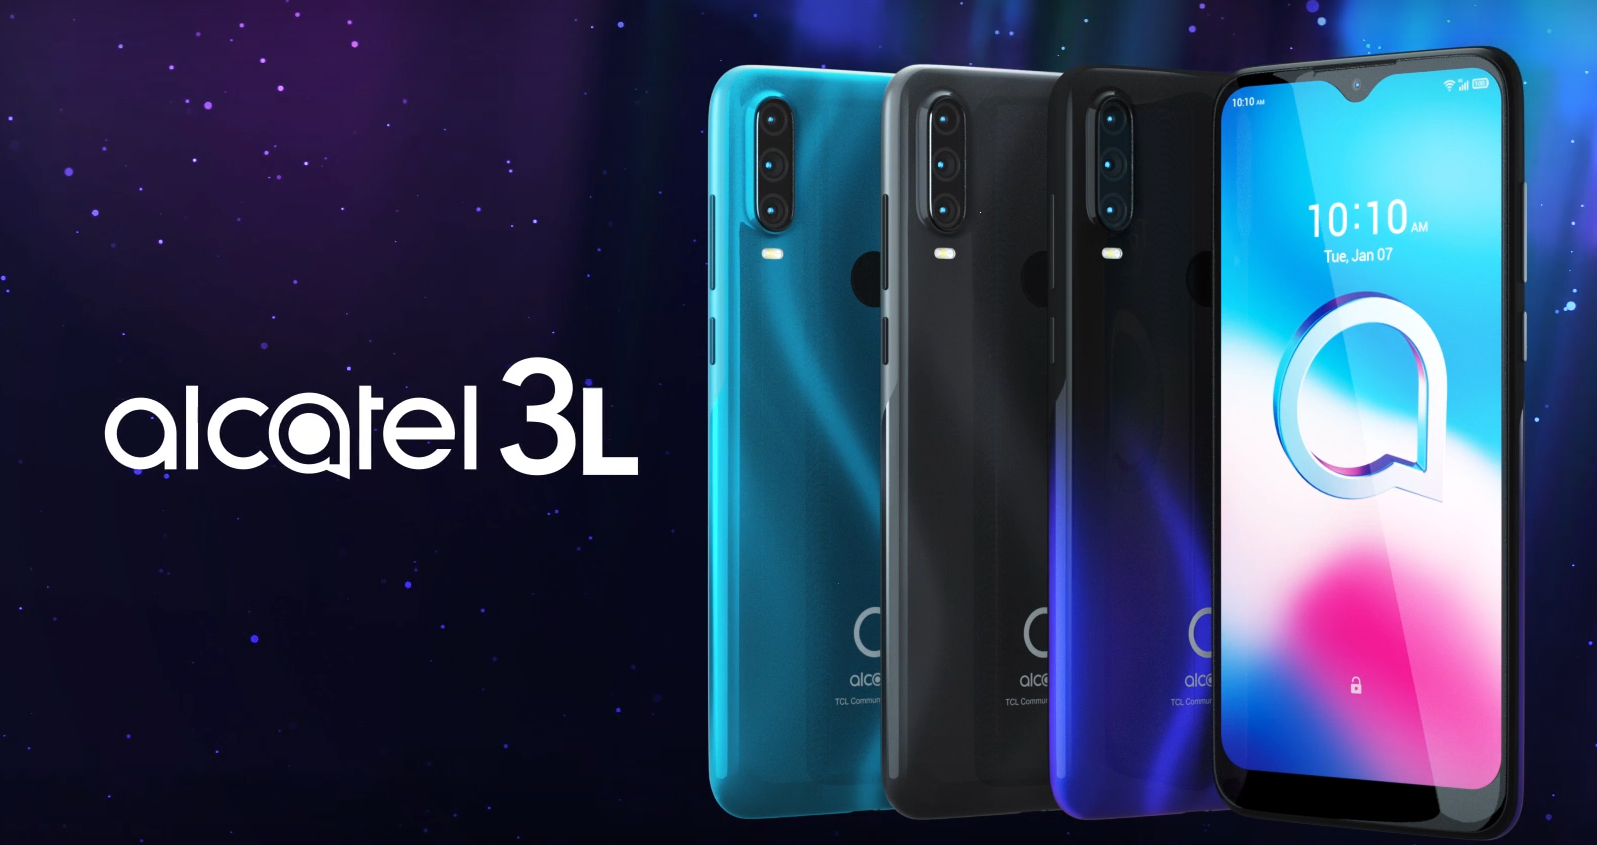 Overview of the Alcatel 3L (2020) smartphone with key features